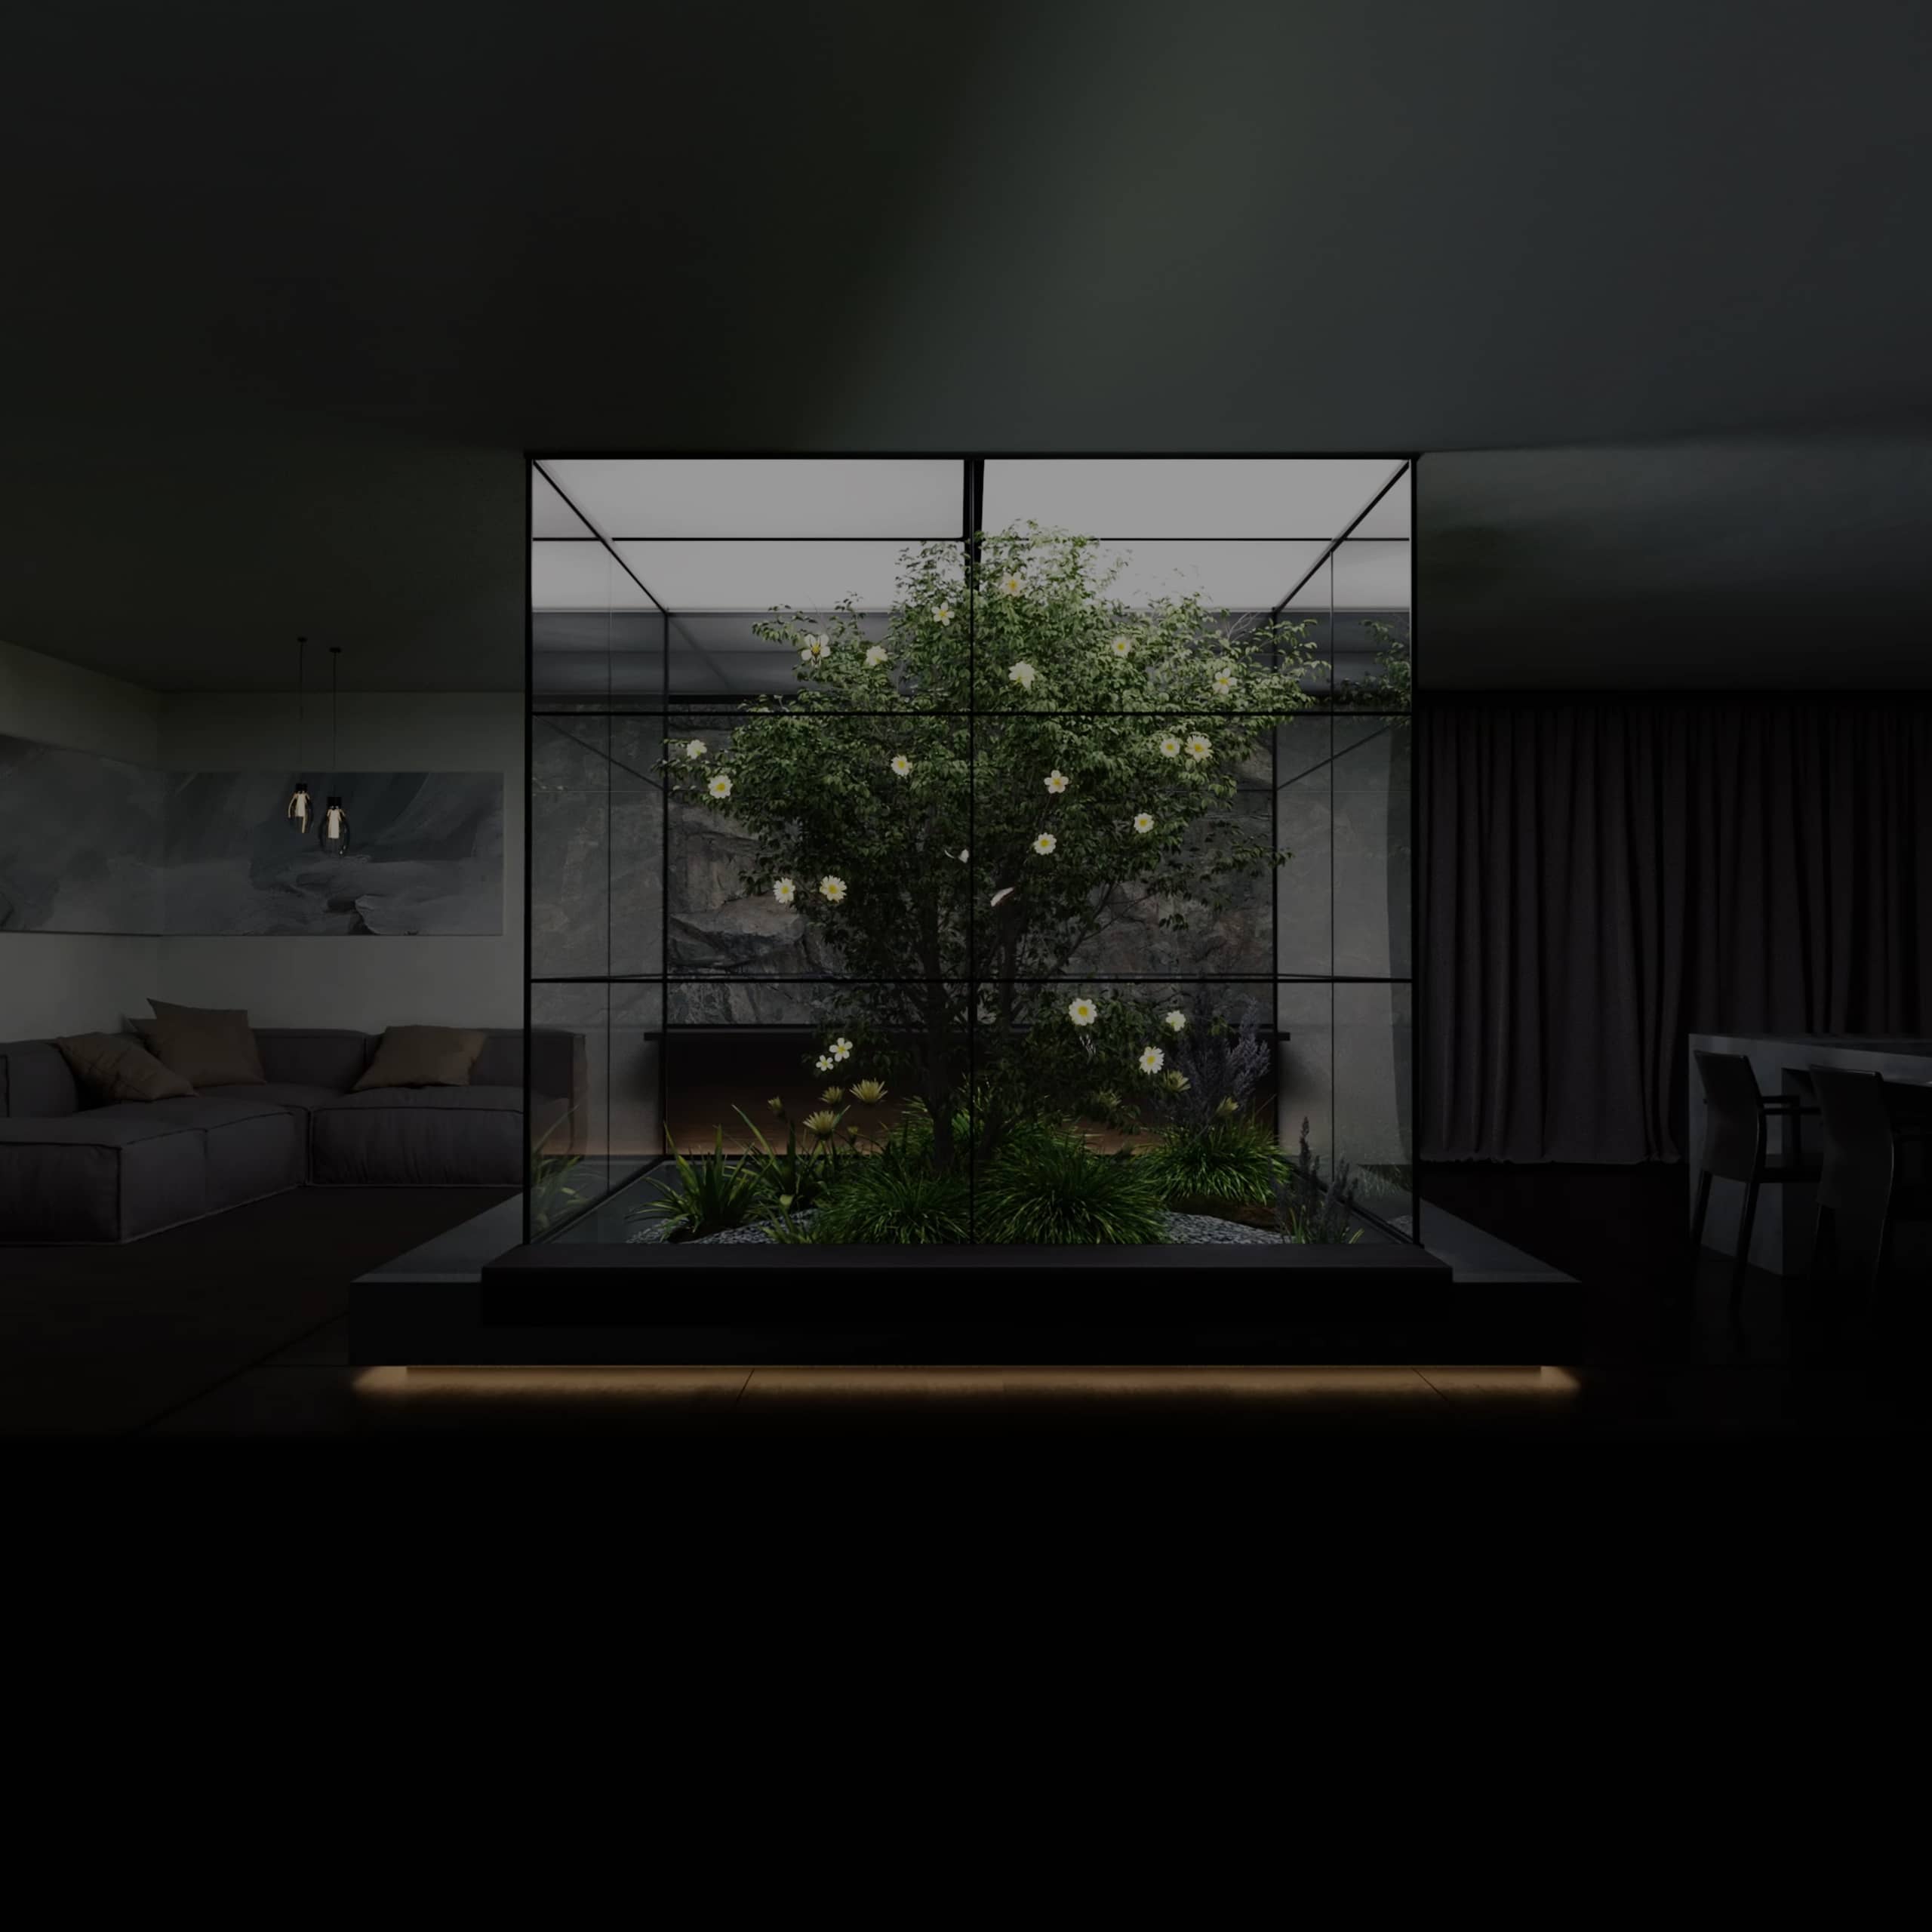 A case consisting of several Transparent OLEDs is installed in the living room, showing trees inside, and flowers bloom around the leaves.